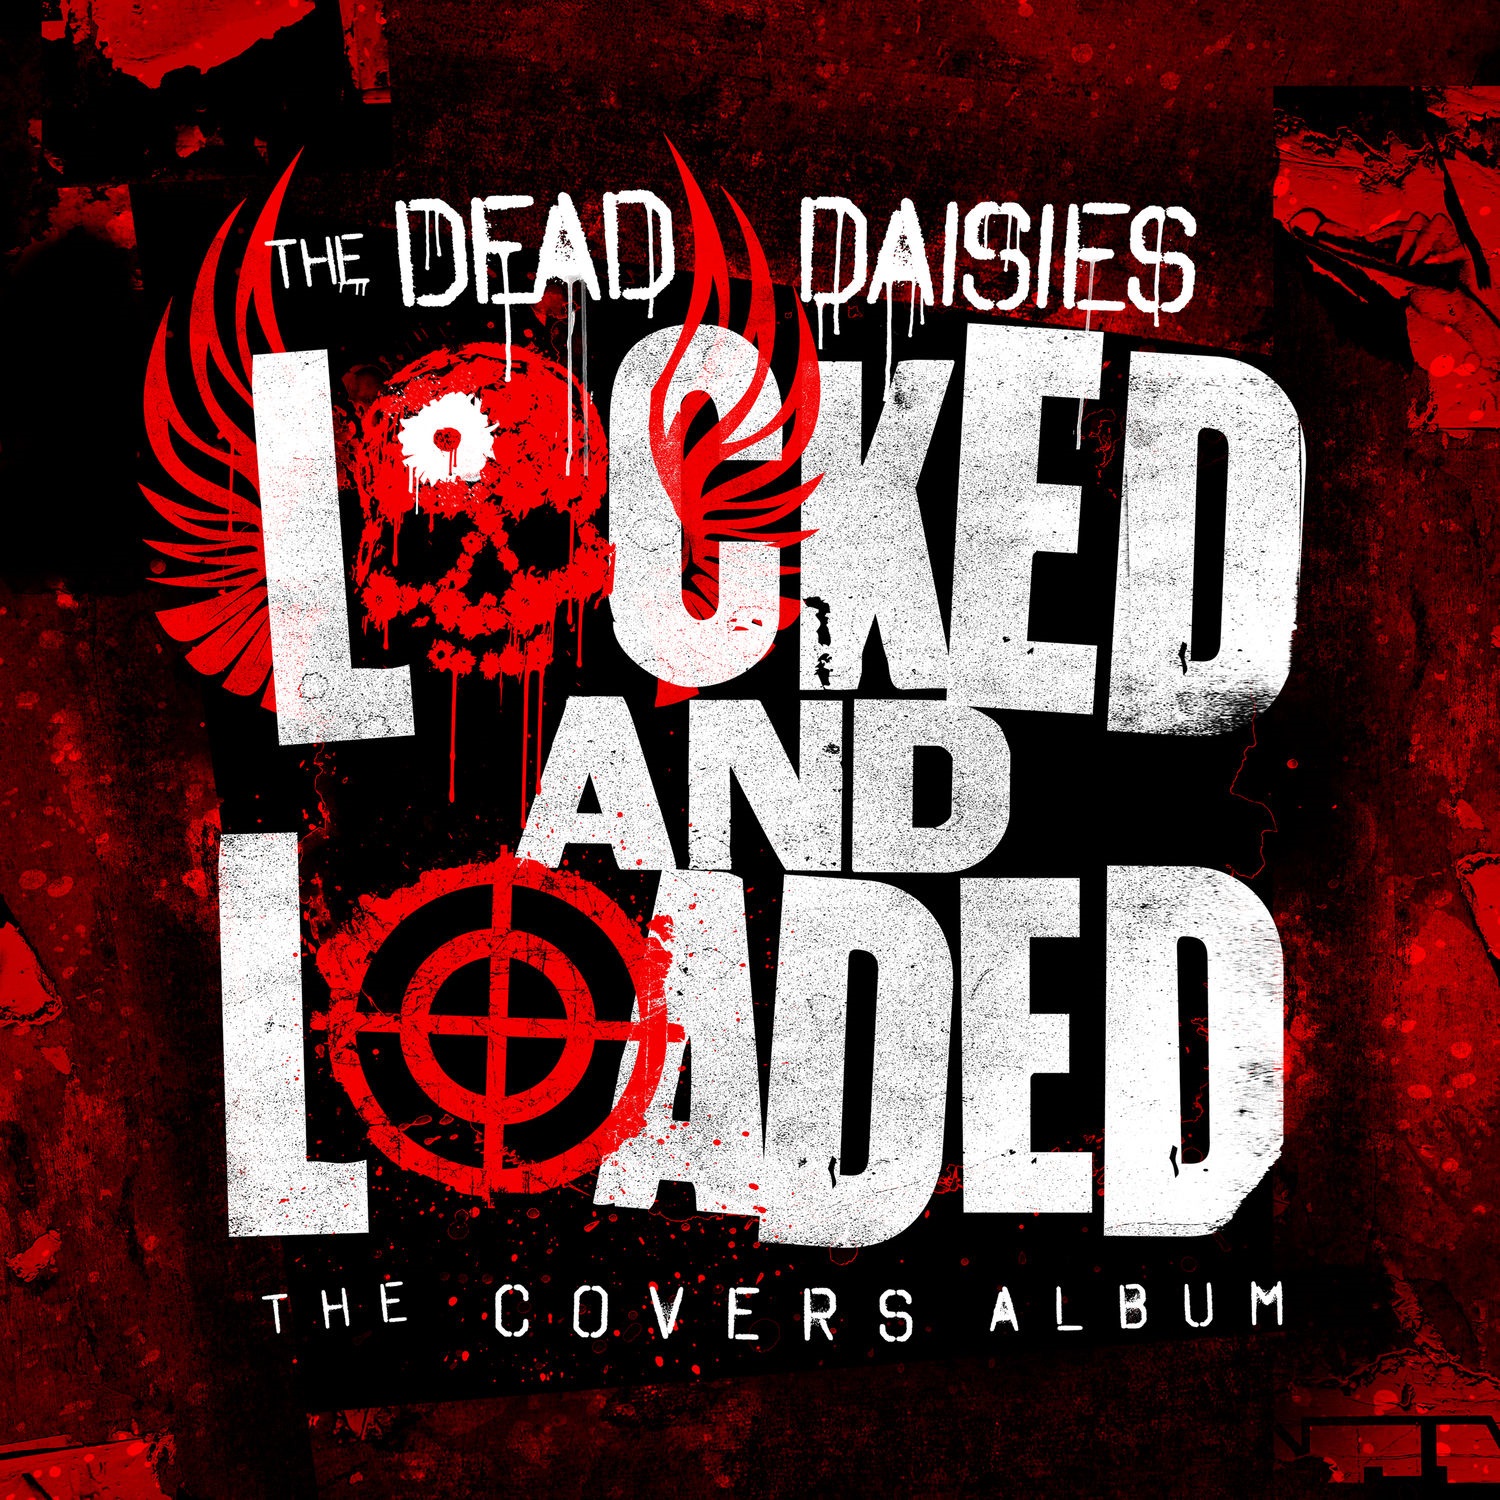 The Dead Daisies – Locked and Loaded (The Covers Album) (2019) [FLAC 24bit/44,1kHz]